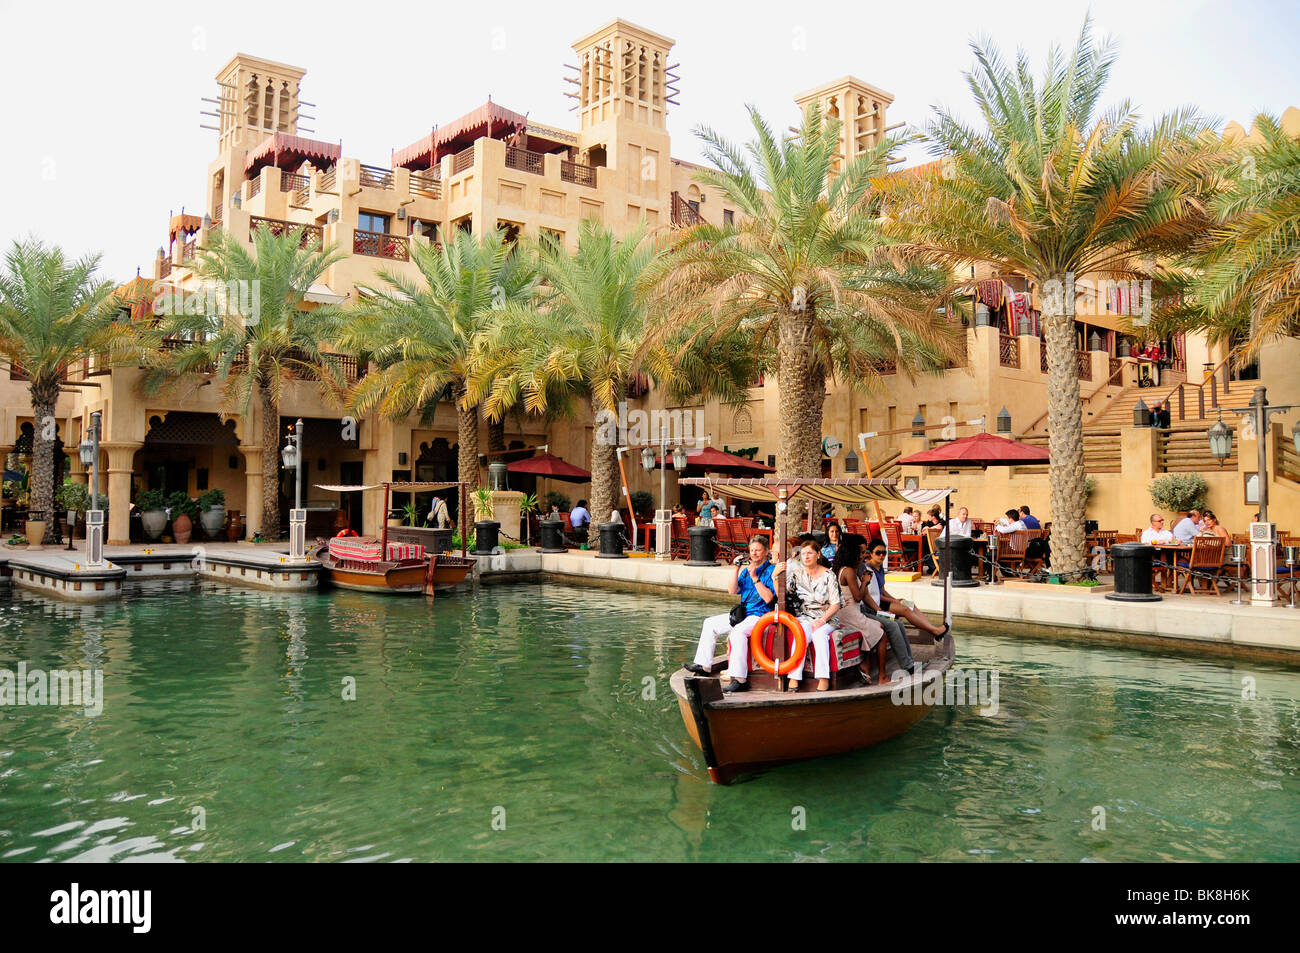 Excursion boat with tourists in the Madinat Jumeirah Resort, Dubai, United Arab Emirates, Arabia, Middle East, Orient Stock Photo